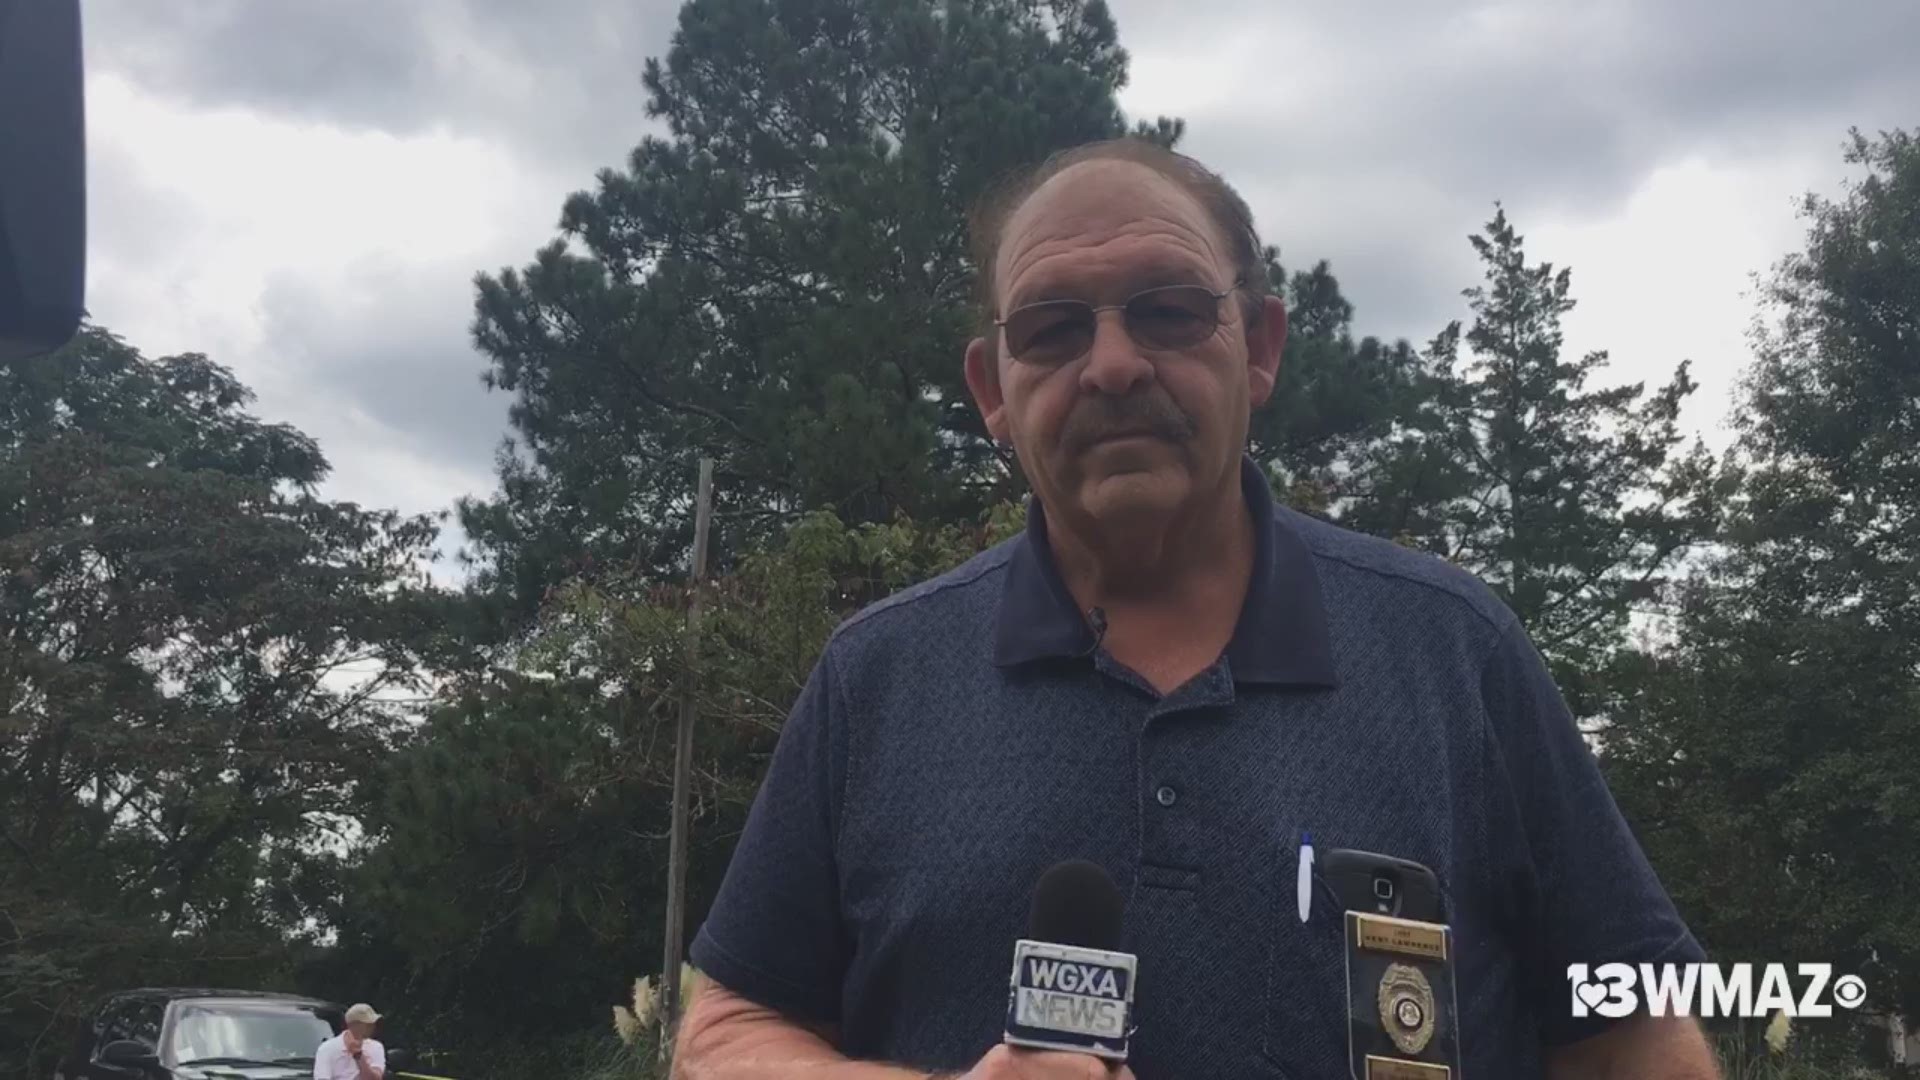 Eatonton Police Chief Kent Lawrence says a man and his niece were found dead in a home on Sparta Highway Wednesday morning. He says they called the Georgia Bureau of Investigation to help with the investigation.